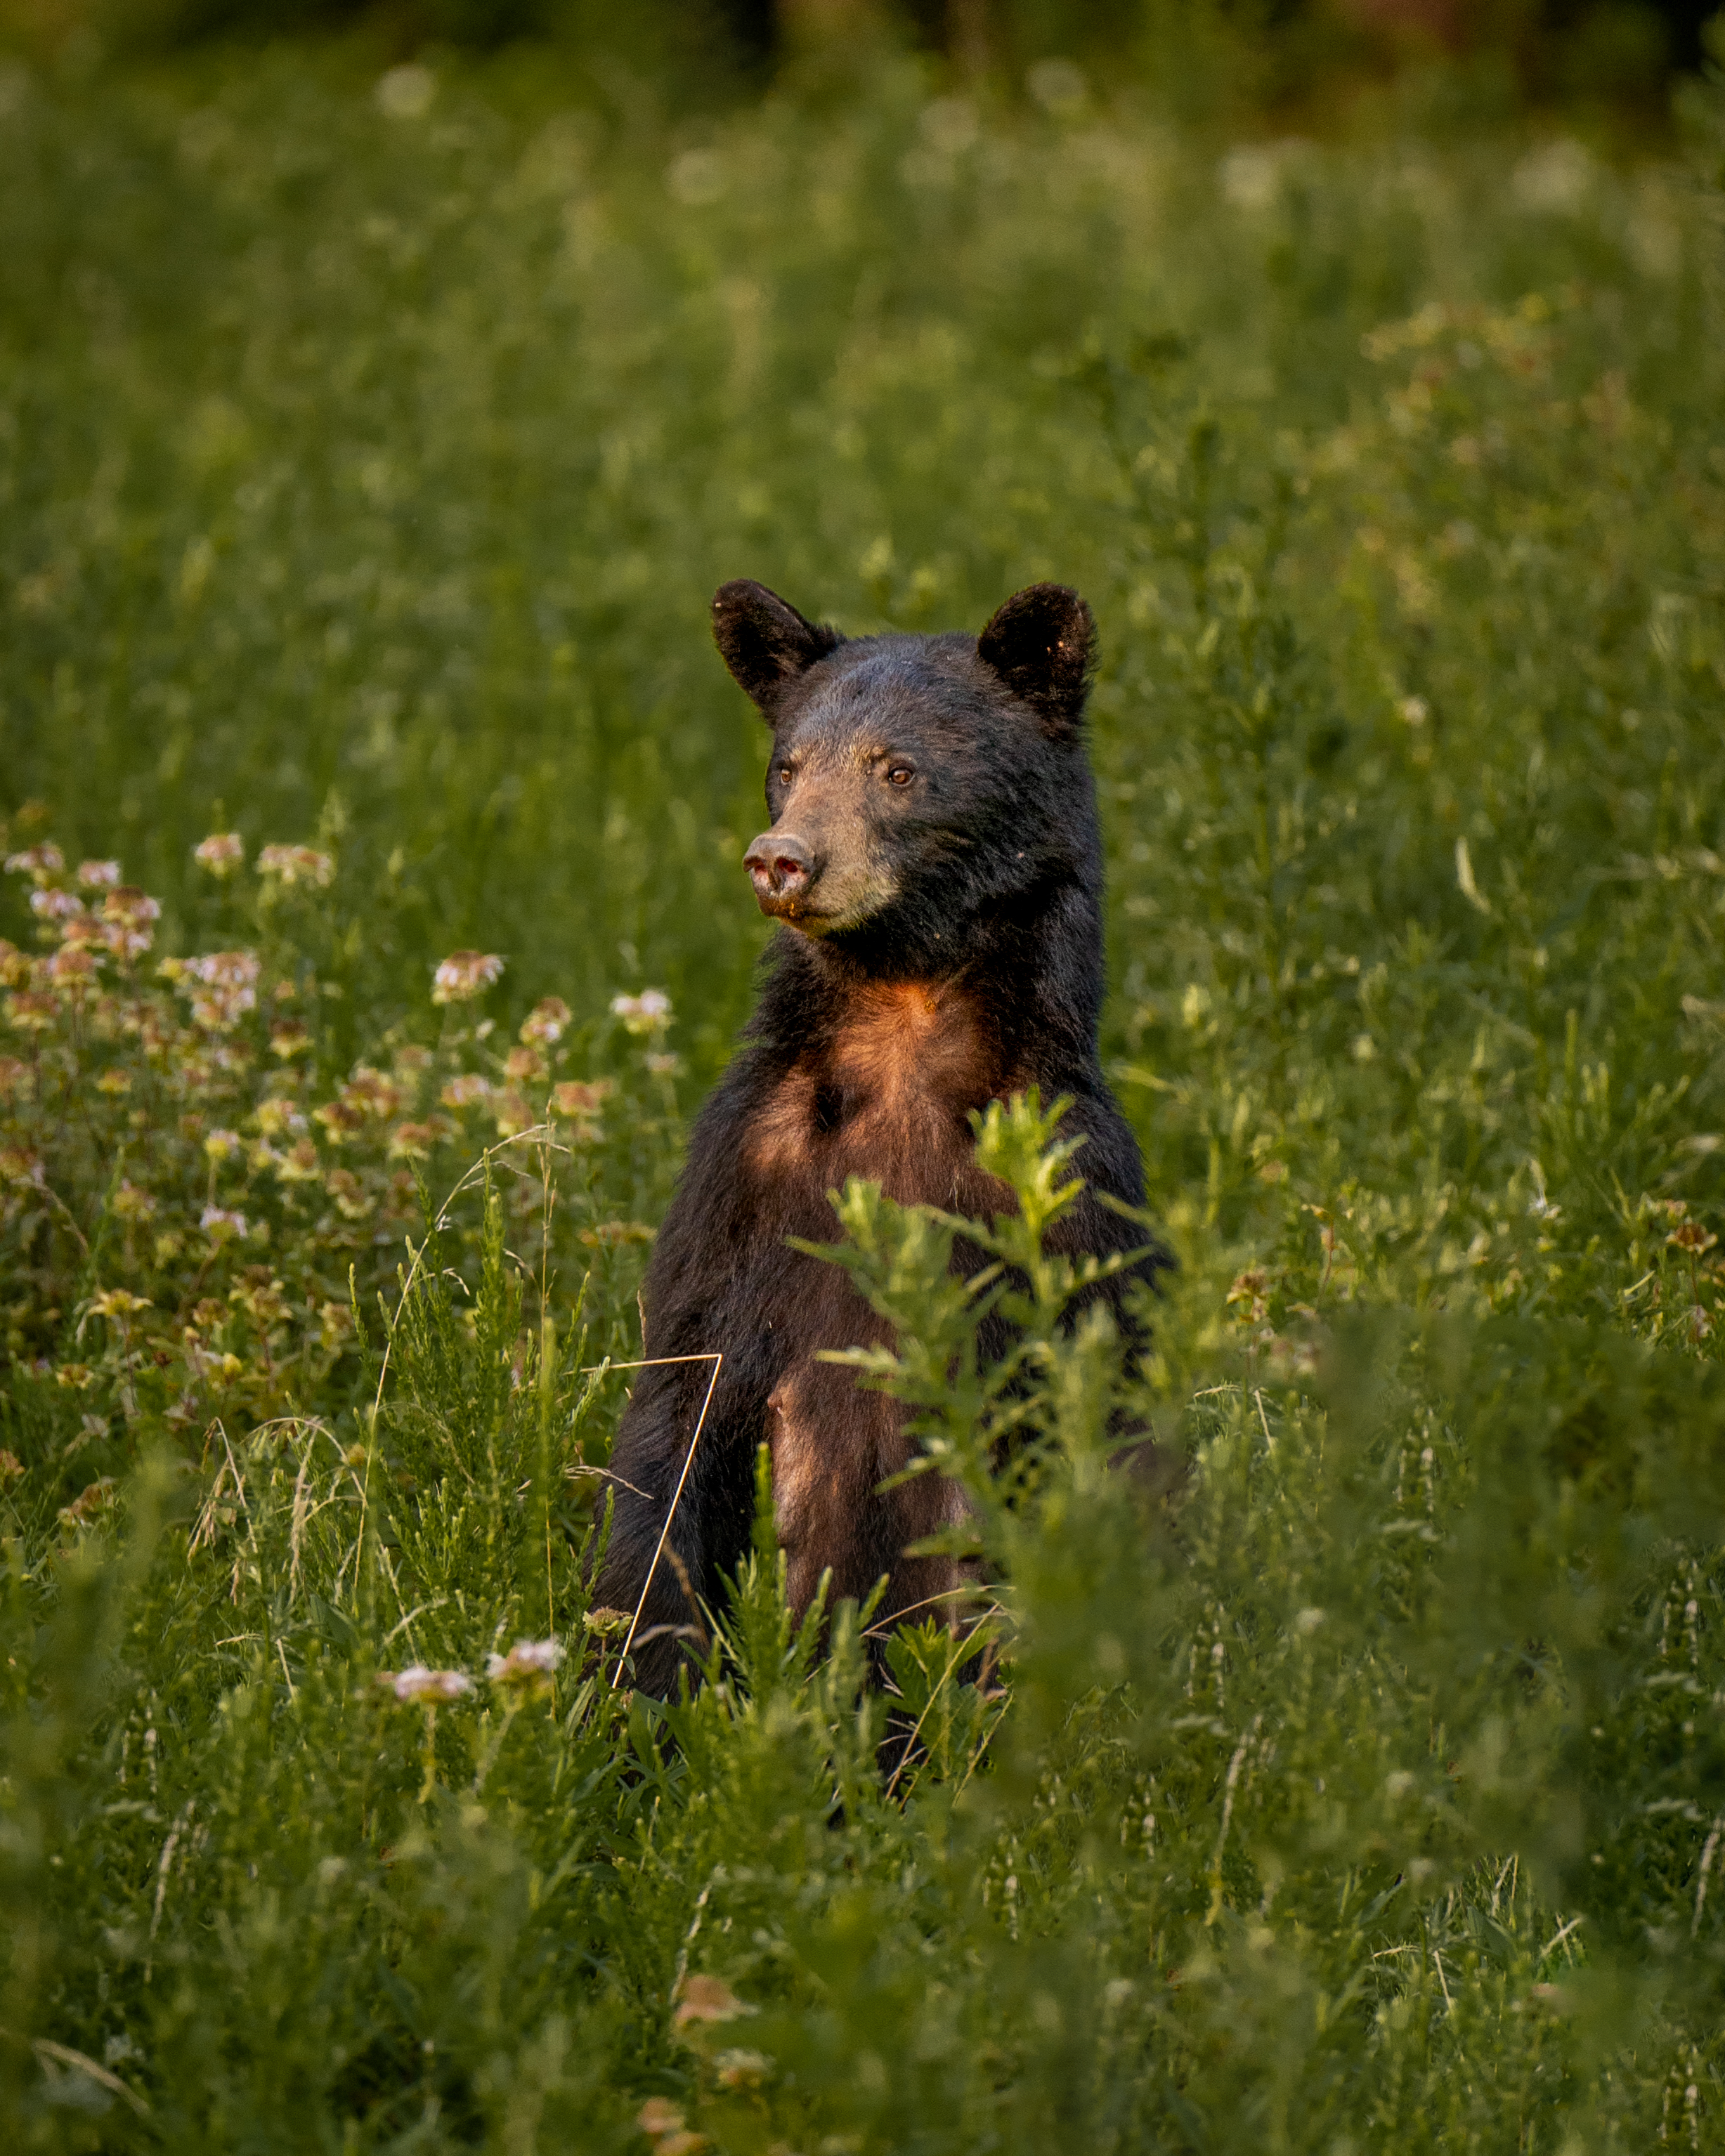 A black bear stands on its hind legs, looking over the surrounding grass.